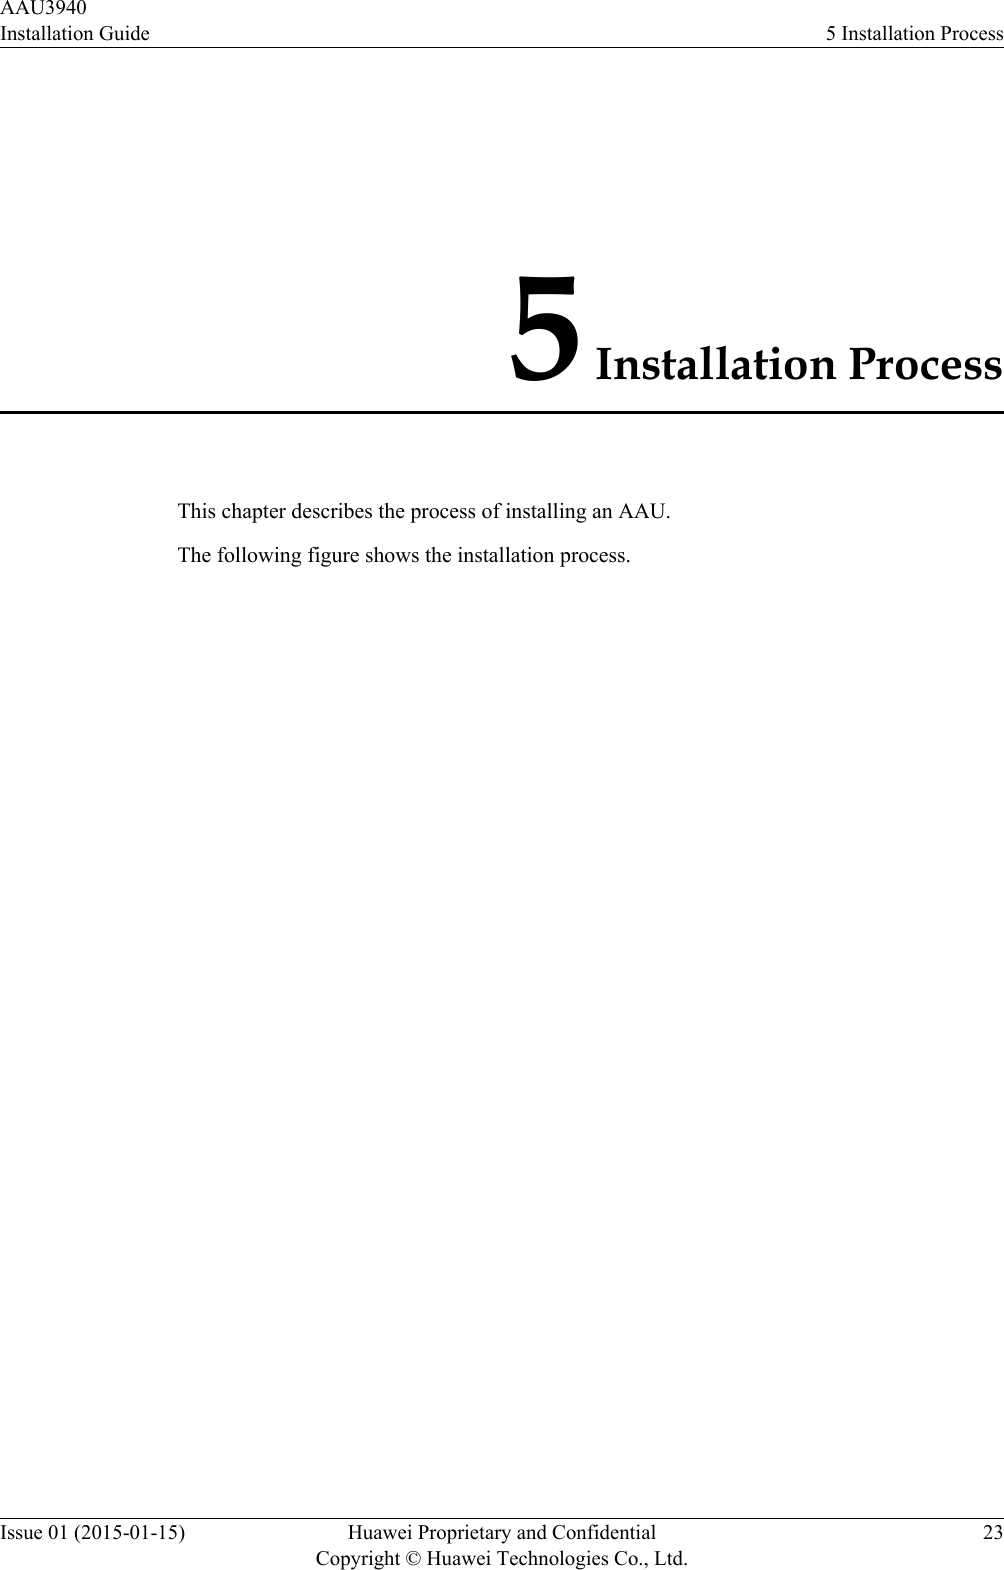 5 Installation ProcessThis chapter describes the process of installing an AAU.The following figure shows the installation process.AAU3940Installation Guide 5 Installation ProcessIssue 01 (2015-01-15) Huawei Proprietary and ConfidentialCopyright © Huawei Technologies Co., Ltd.23